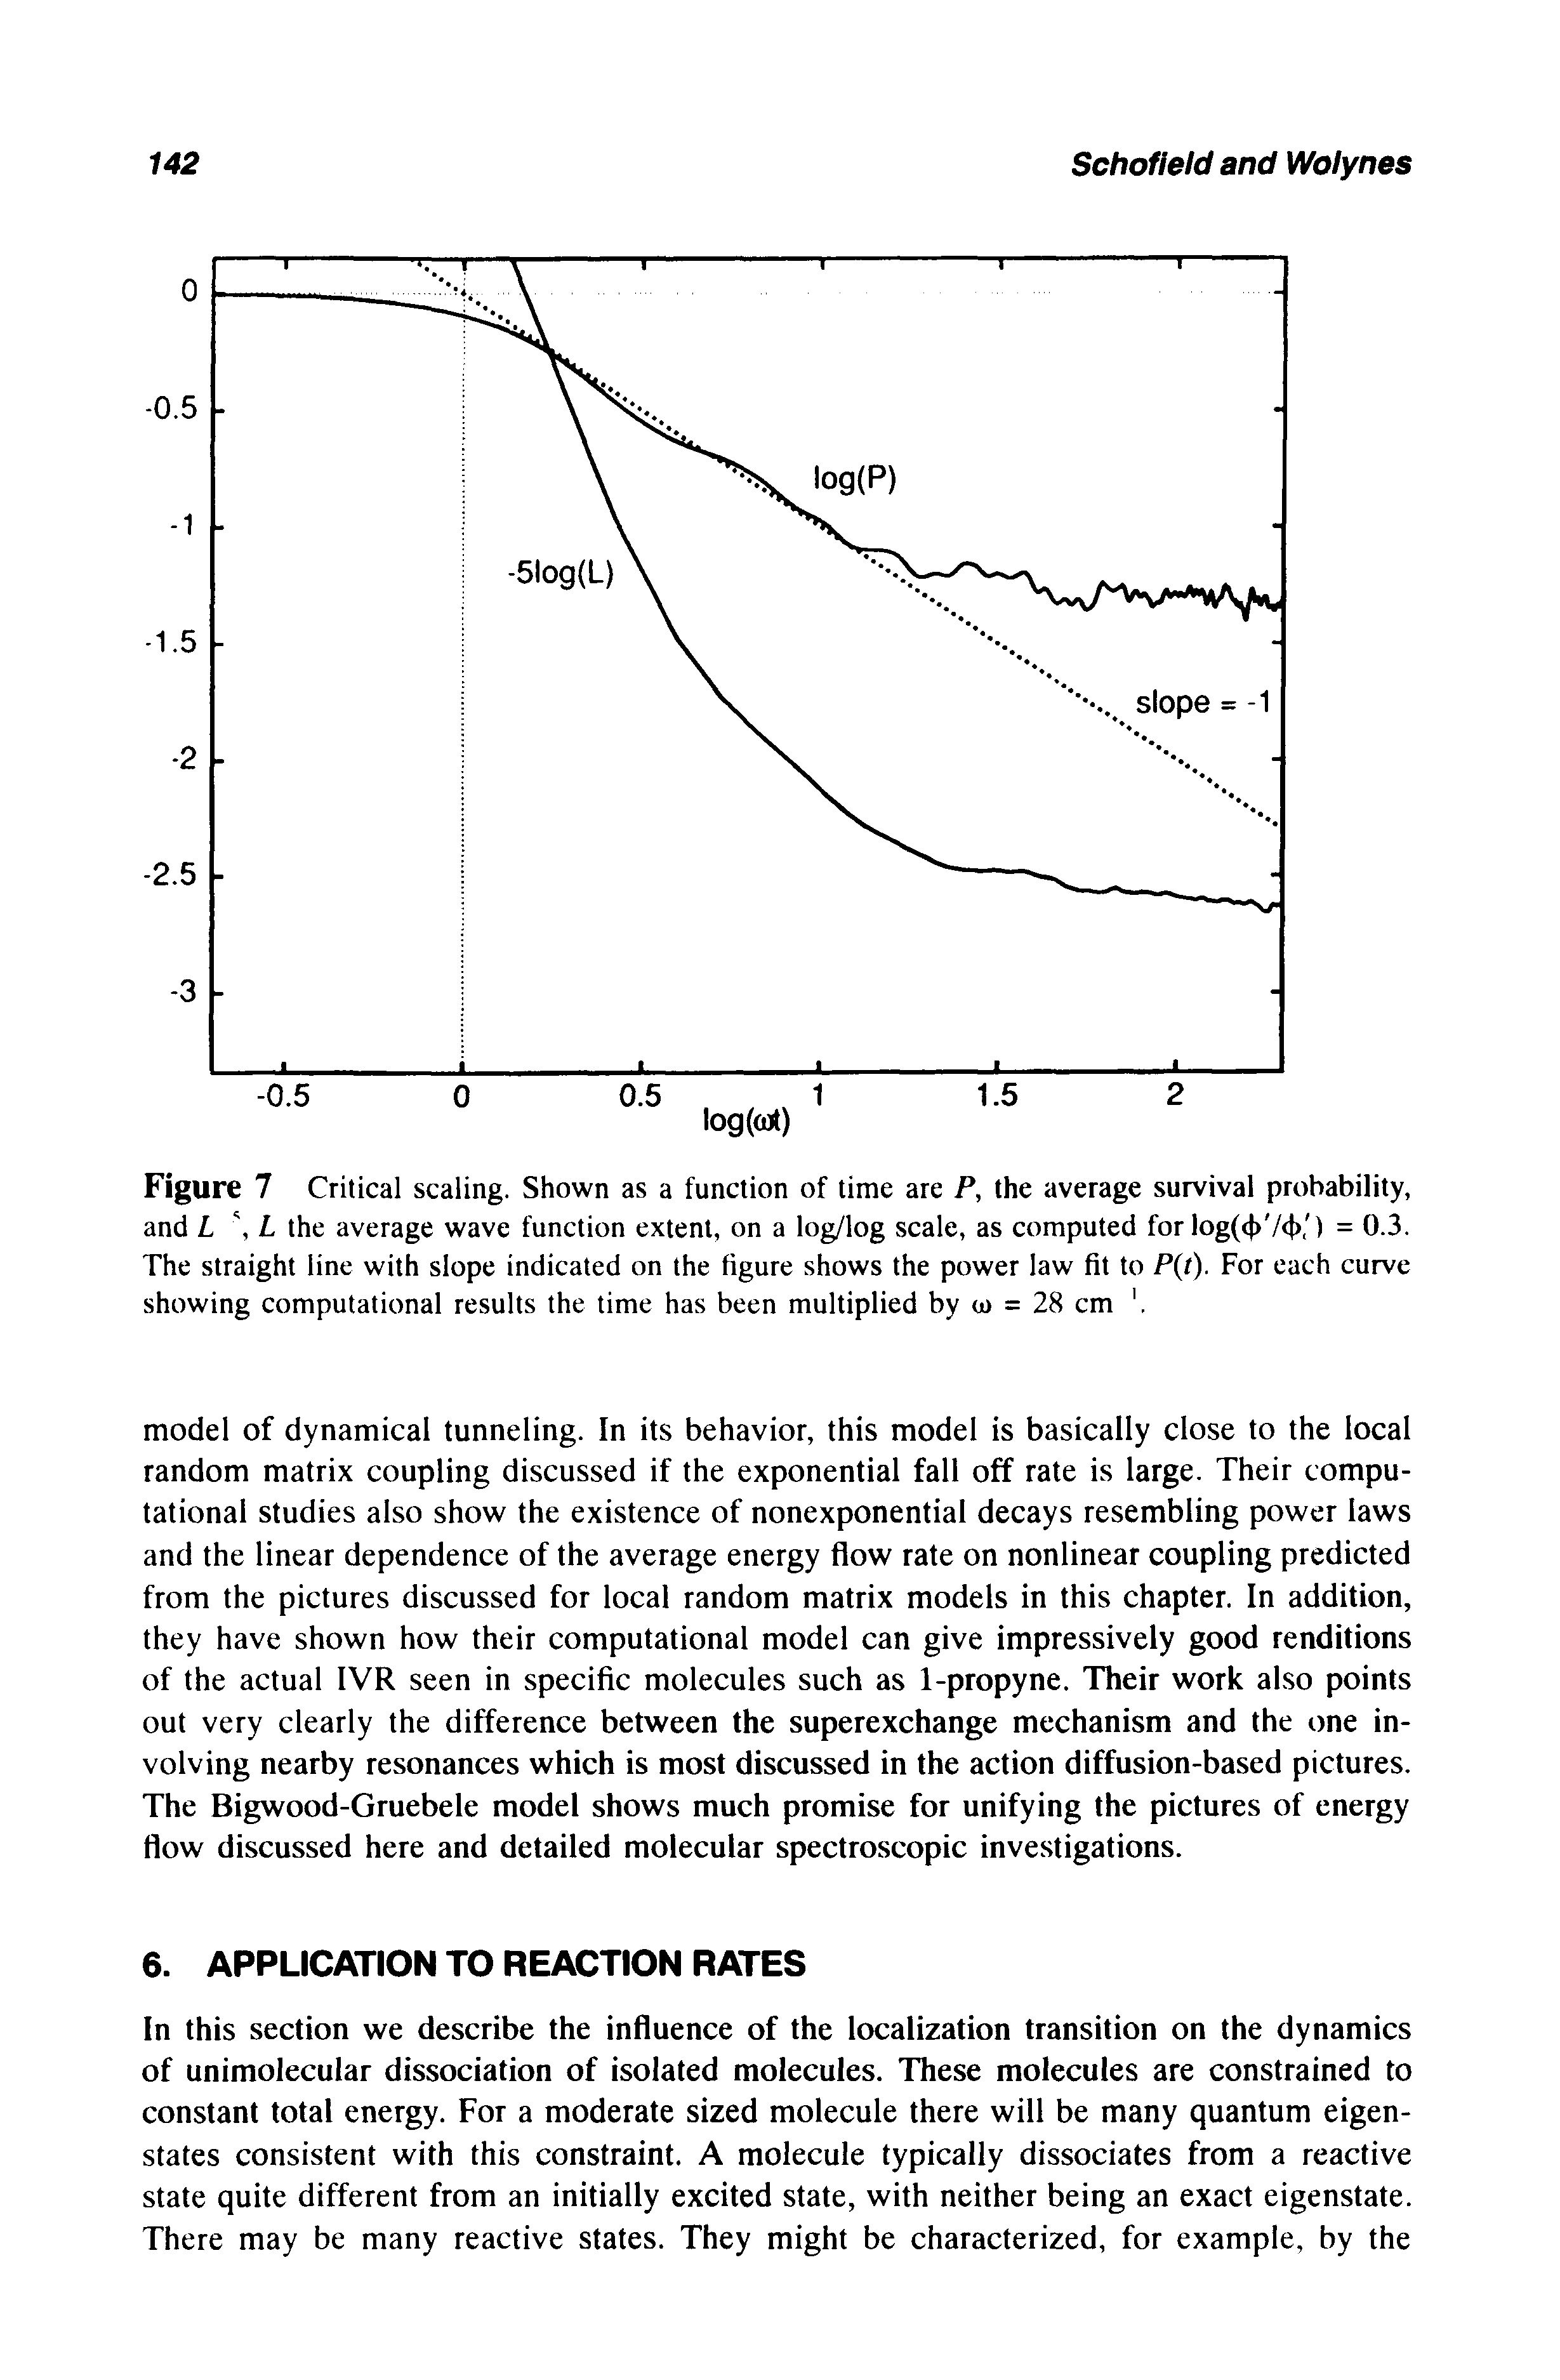 Figure 7 Critical scaling. Shown as a function of time are P, the average survival probability, and L L the average wave function extent, on a log/log scale, as computed for log(4> /<t>, ) = 0.3. The straight line with slope indicated on the figure shows the power law fit to P(t). For each curve showing computational results the time has been multiplied by u) = 28 cm. ...